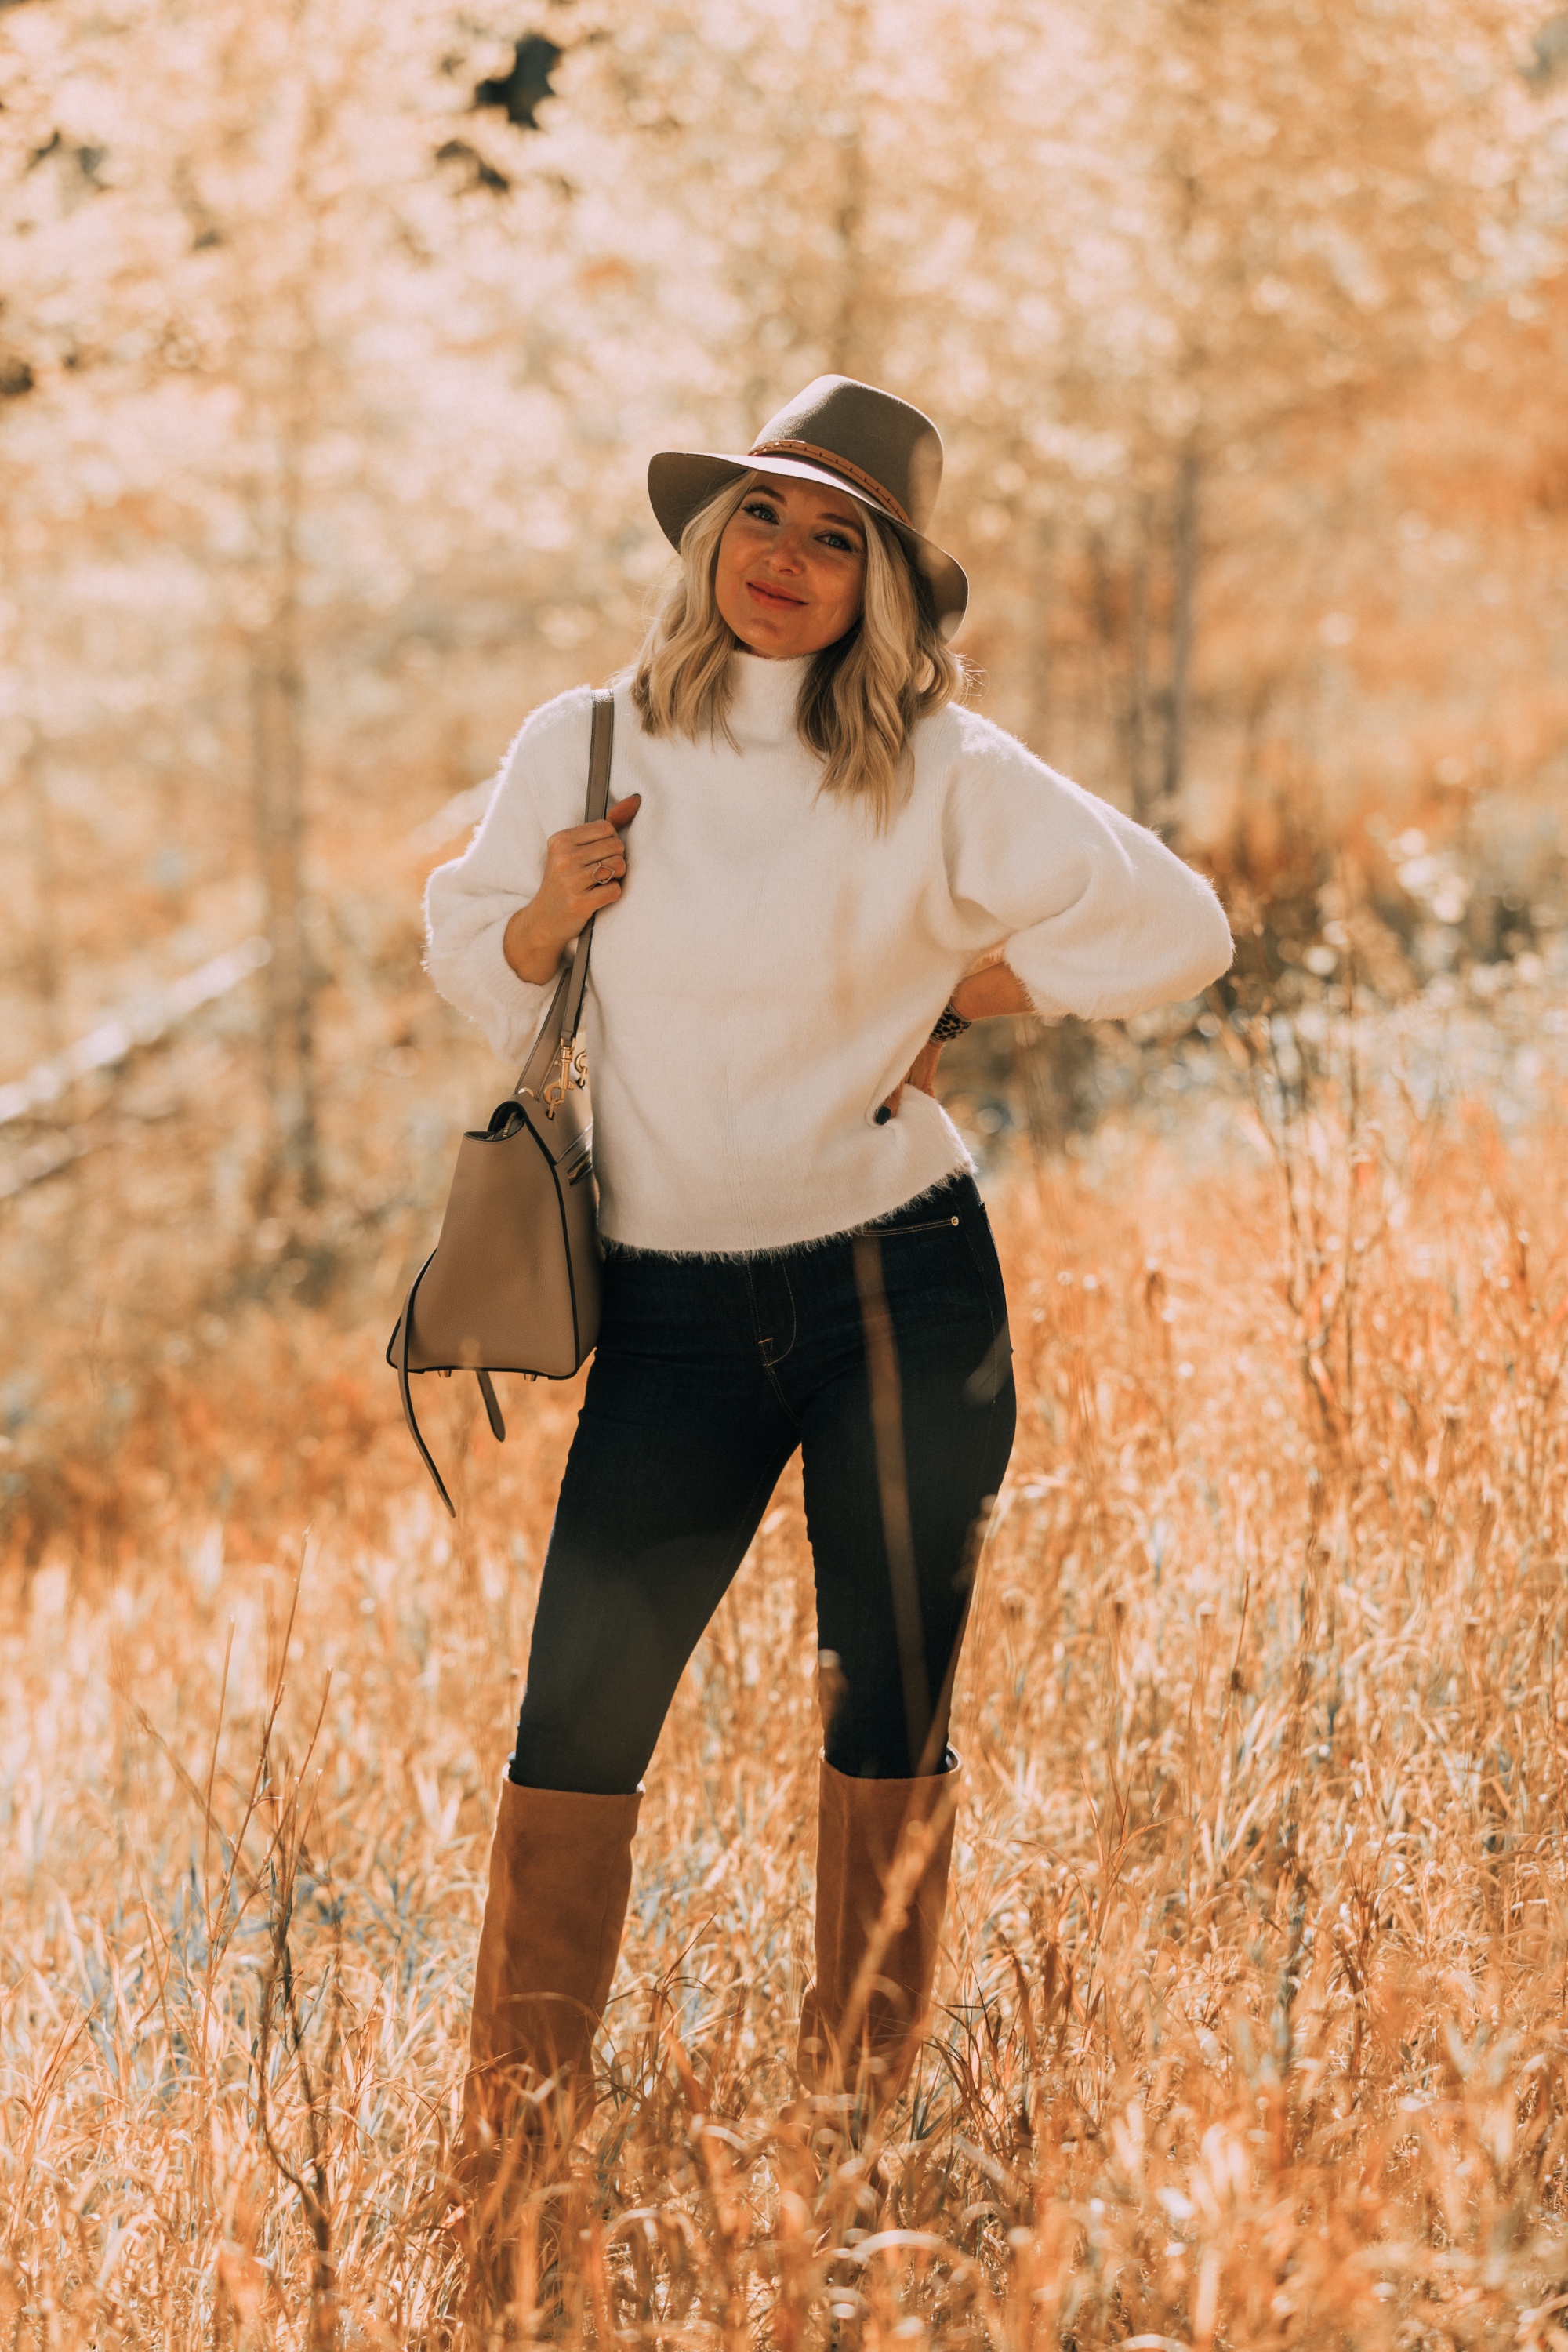 Fuzzy Sweaters, Fashion blogger Erin Busbee of BusbeeStyle.com wearing a white fuzzy sweater by Line & Dot with rag & bone skinny jeans, brown knee high boots, celine belt bag, and treasure & bond floppy brim hat in Telluride, Colorado